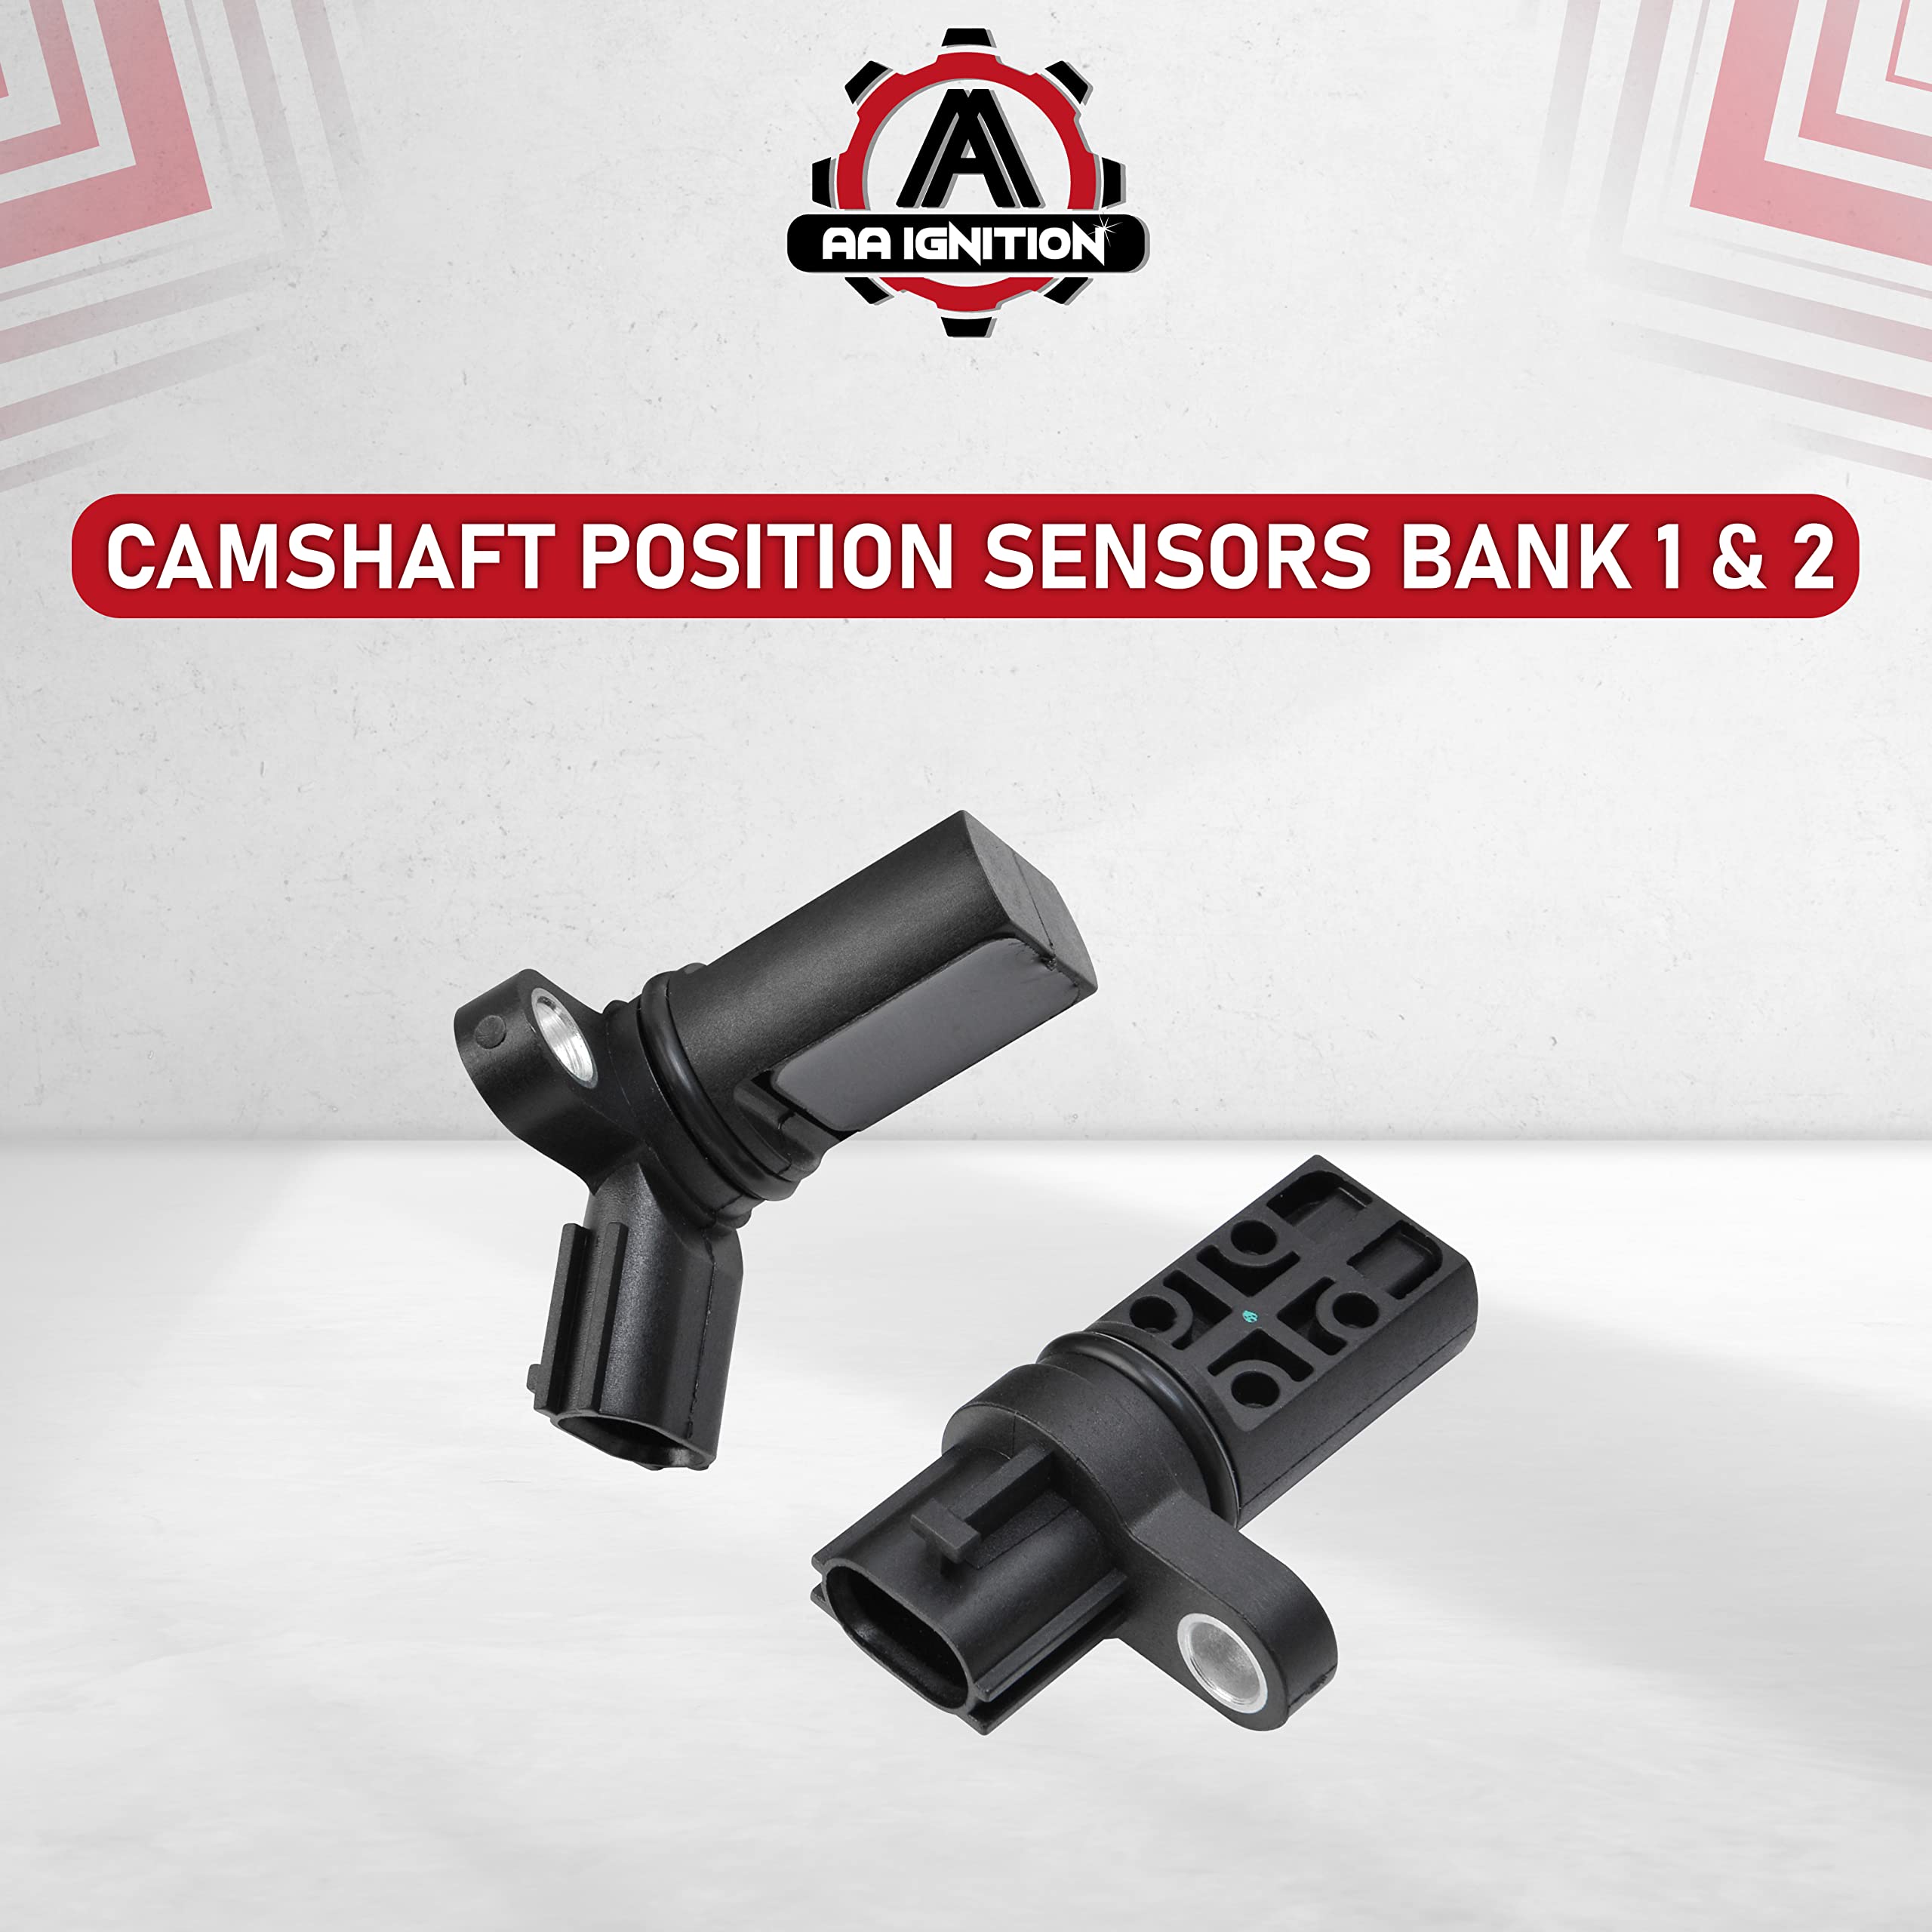 Camshaft Position Sensor Phase Set of 2 - Compatible with Nissan and Infiniti 3.5L, 4.0L V6 Altima, Maxima, 350Z, Pathfinder, FX35, G35, QX45 - Replaces 23731-AL61A, 917-704, 237316J90B, 907-716  - Like New